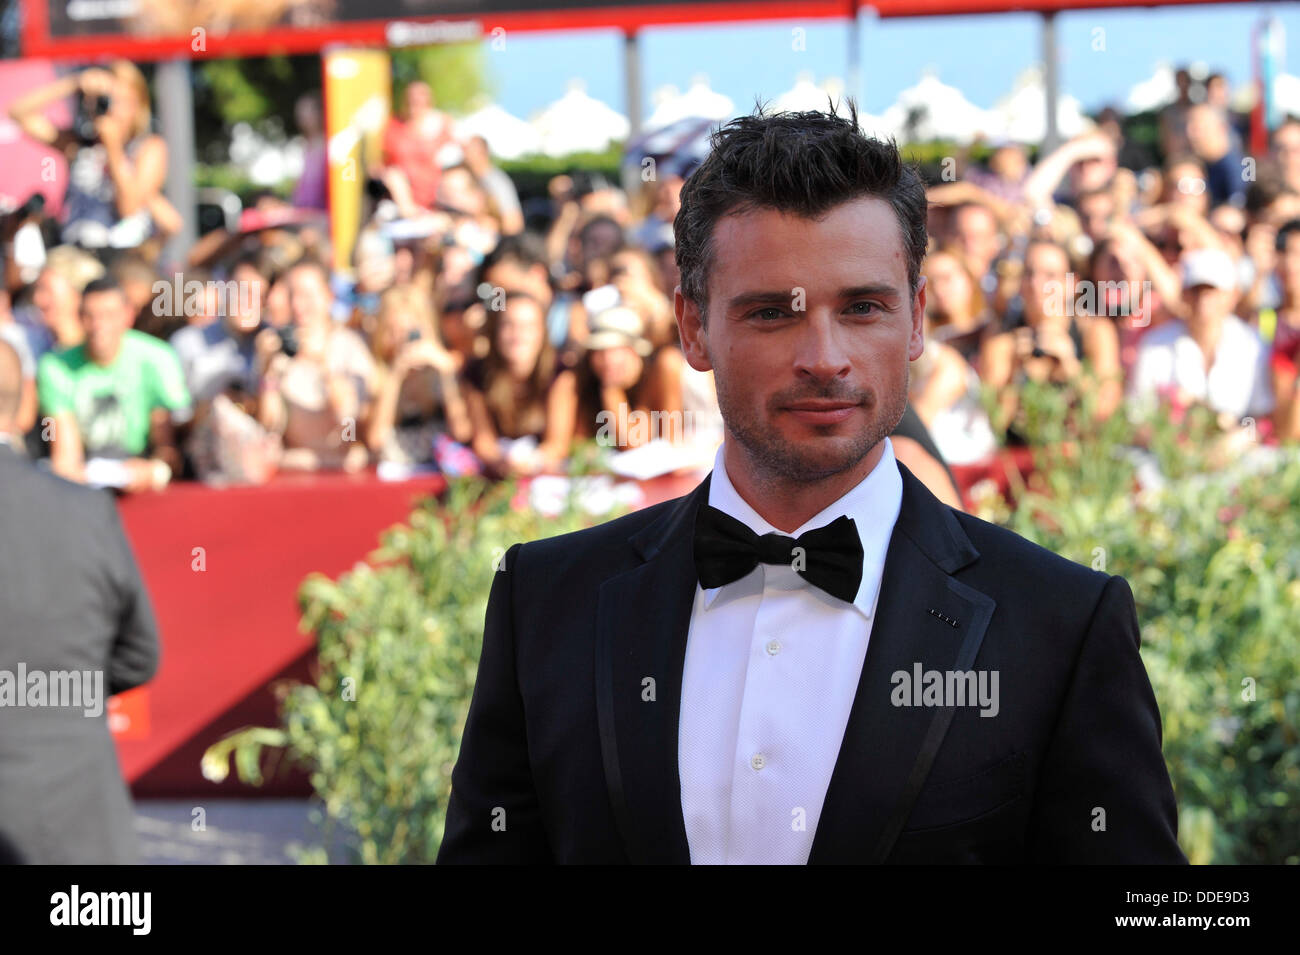 Actor Tom Welling attends the 'Parkland' Premiere during the 70th Venice International Film Festival at the Palazzo Del Cinema on September 1, 2013 in Venice, Italy. Stock Photo